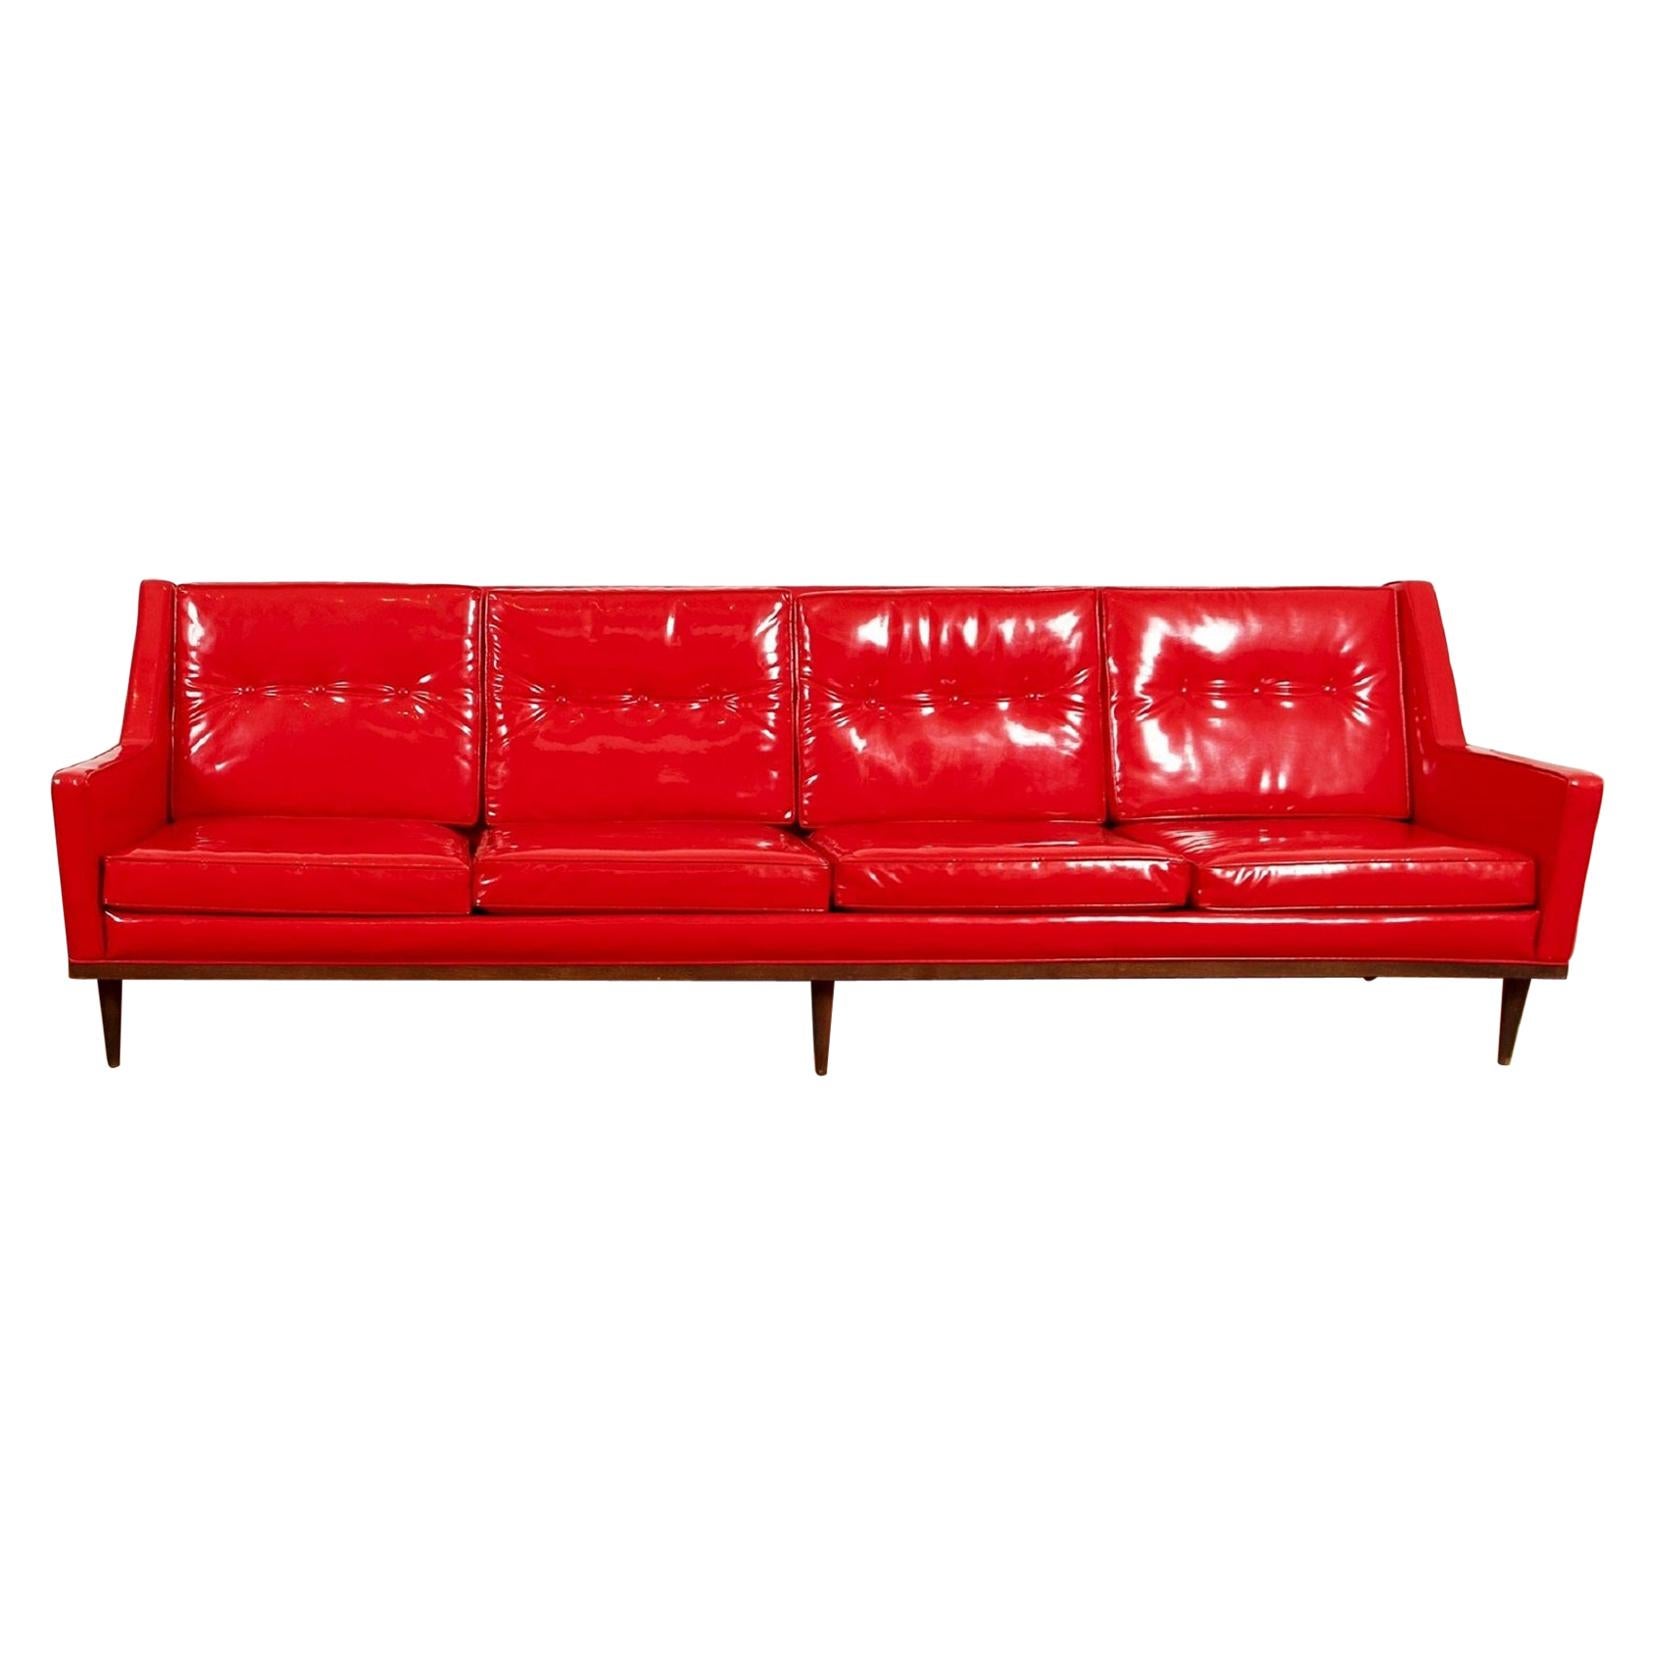 Polar Tact Climatic mountains Milo Baughman for Thayer Coggin Red Vinyl Sofa For Sale at 1stDibs